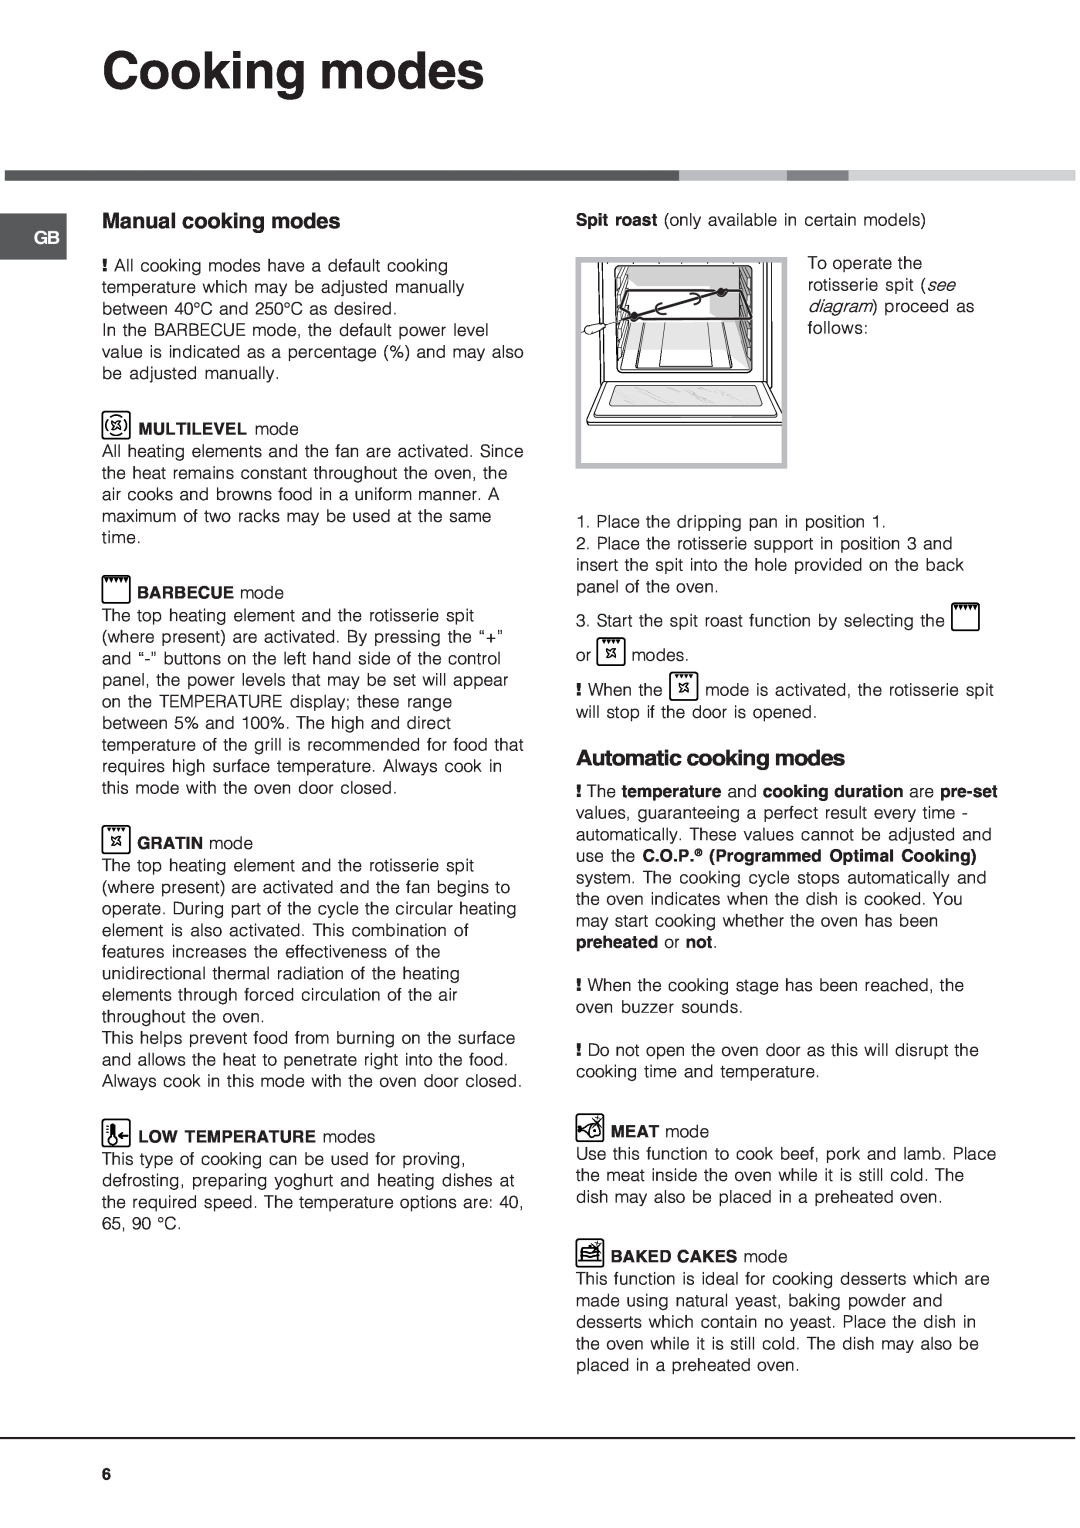 Hotpoint SE1022X manual Cooking modes, Manual cooking modes, Automatic cooking modes 